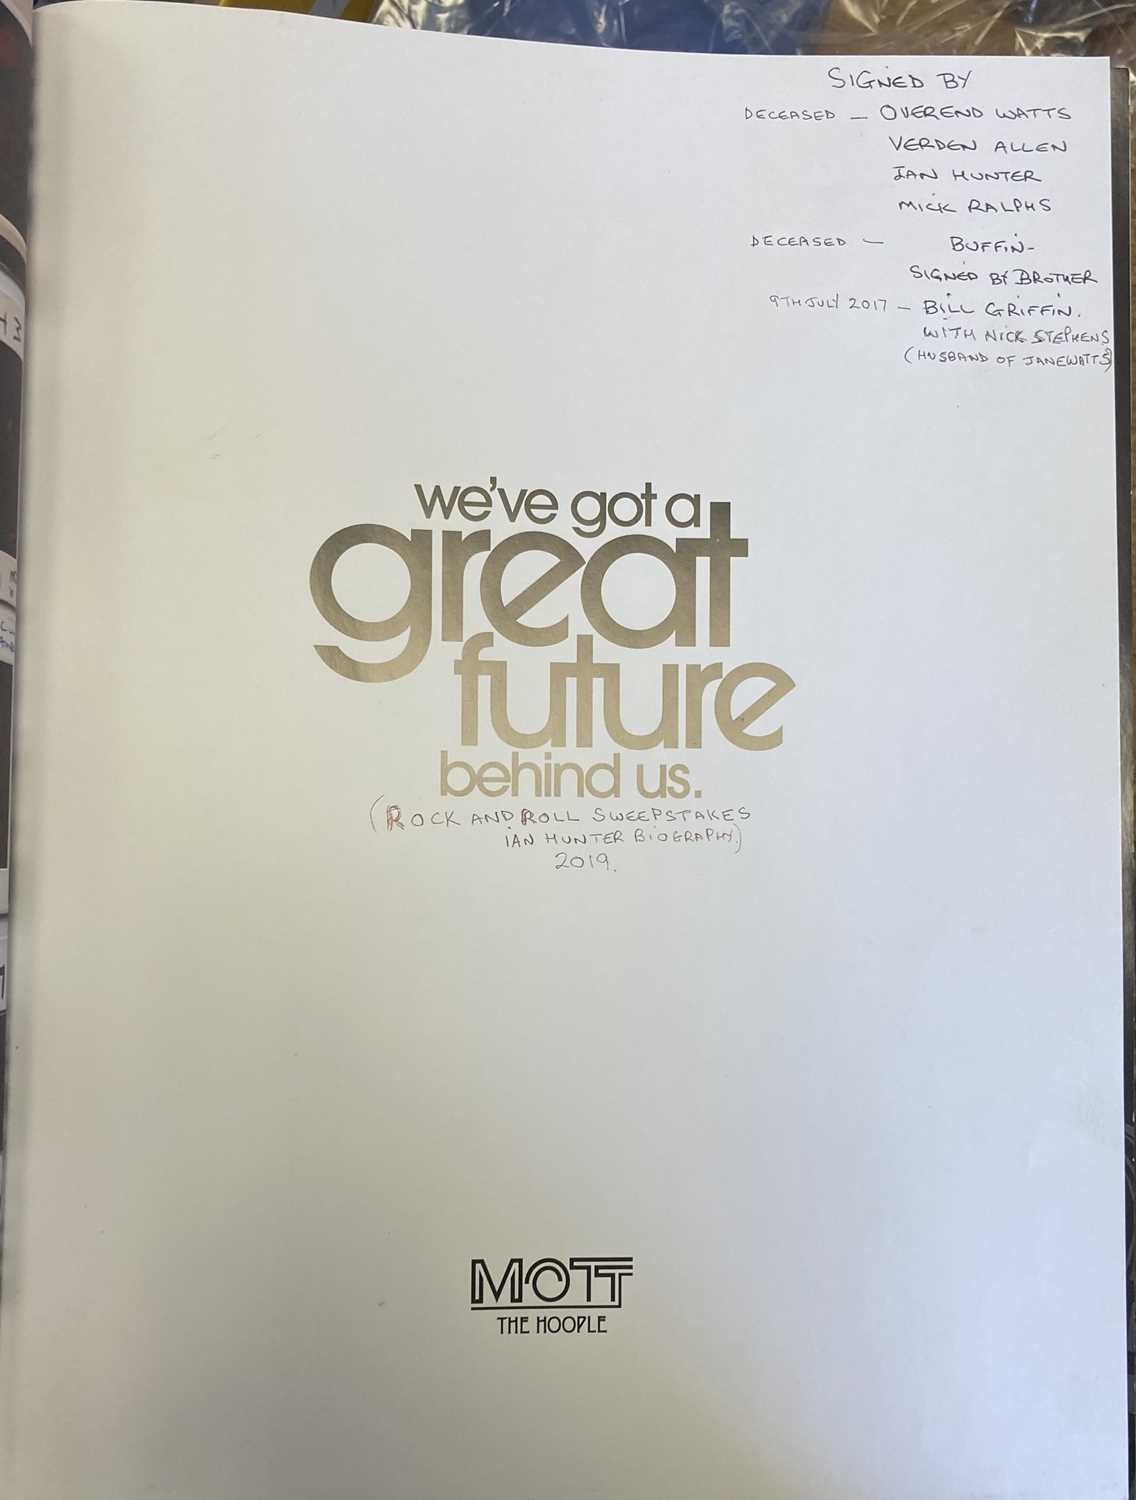 MOTT THE HOOPLE SIGNED LIMITED EDITION BOOK. - Image 6 of 8